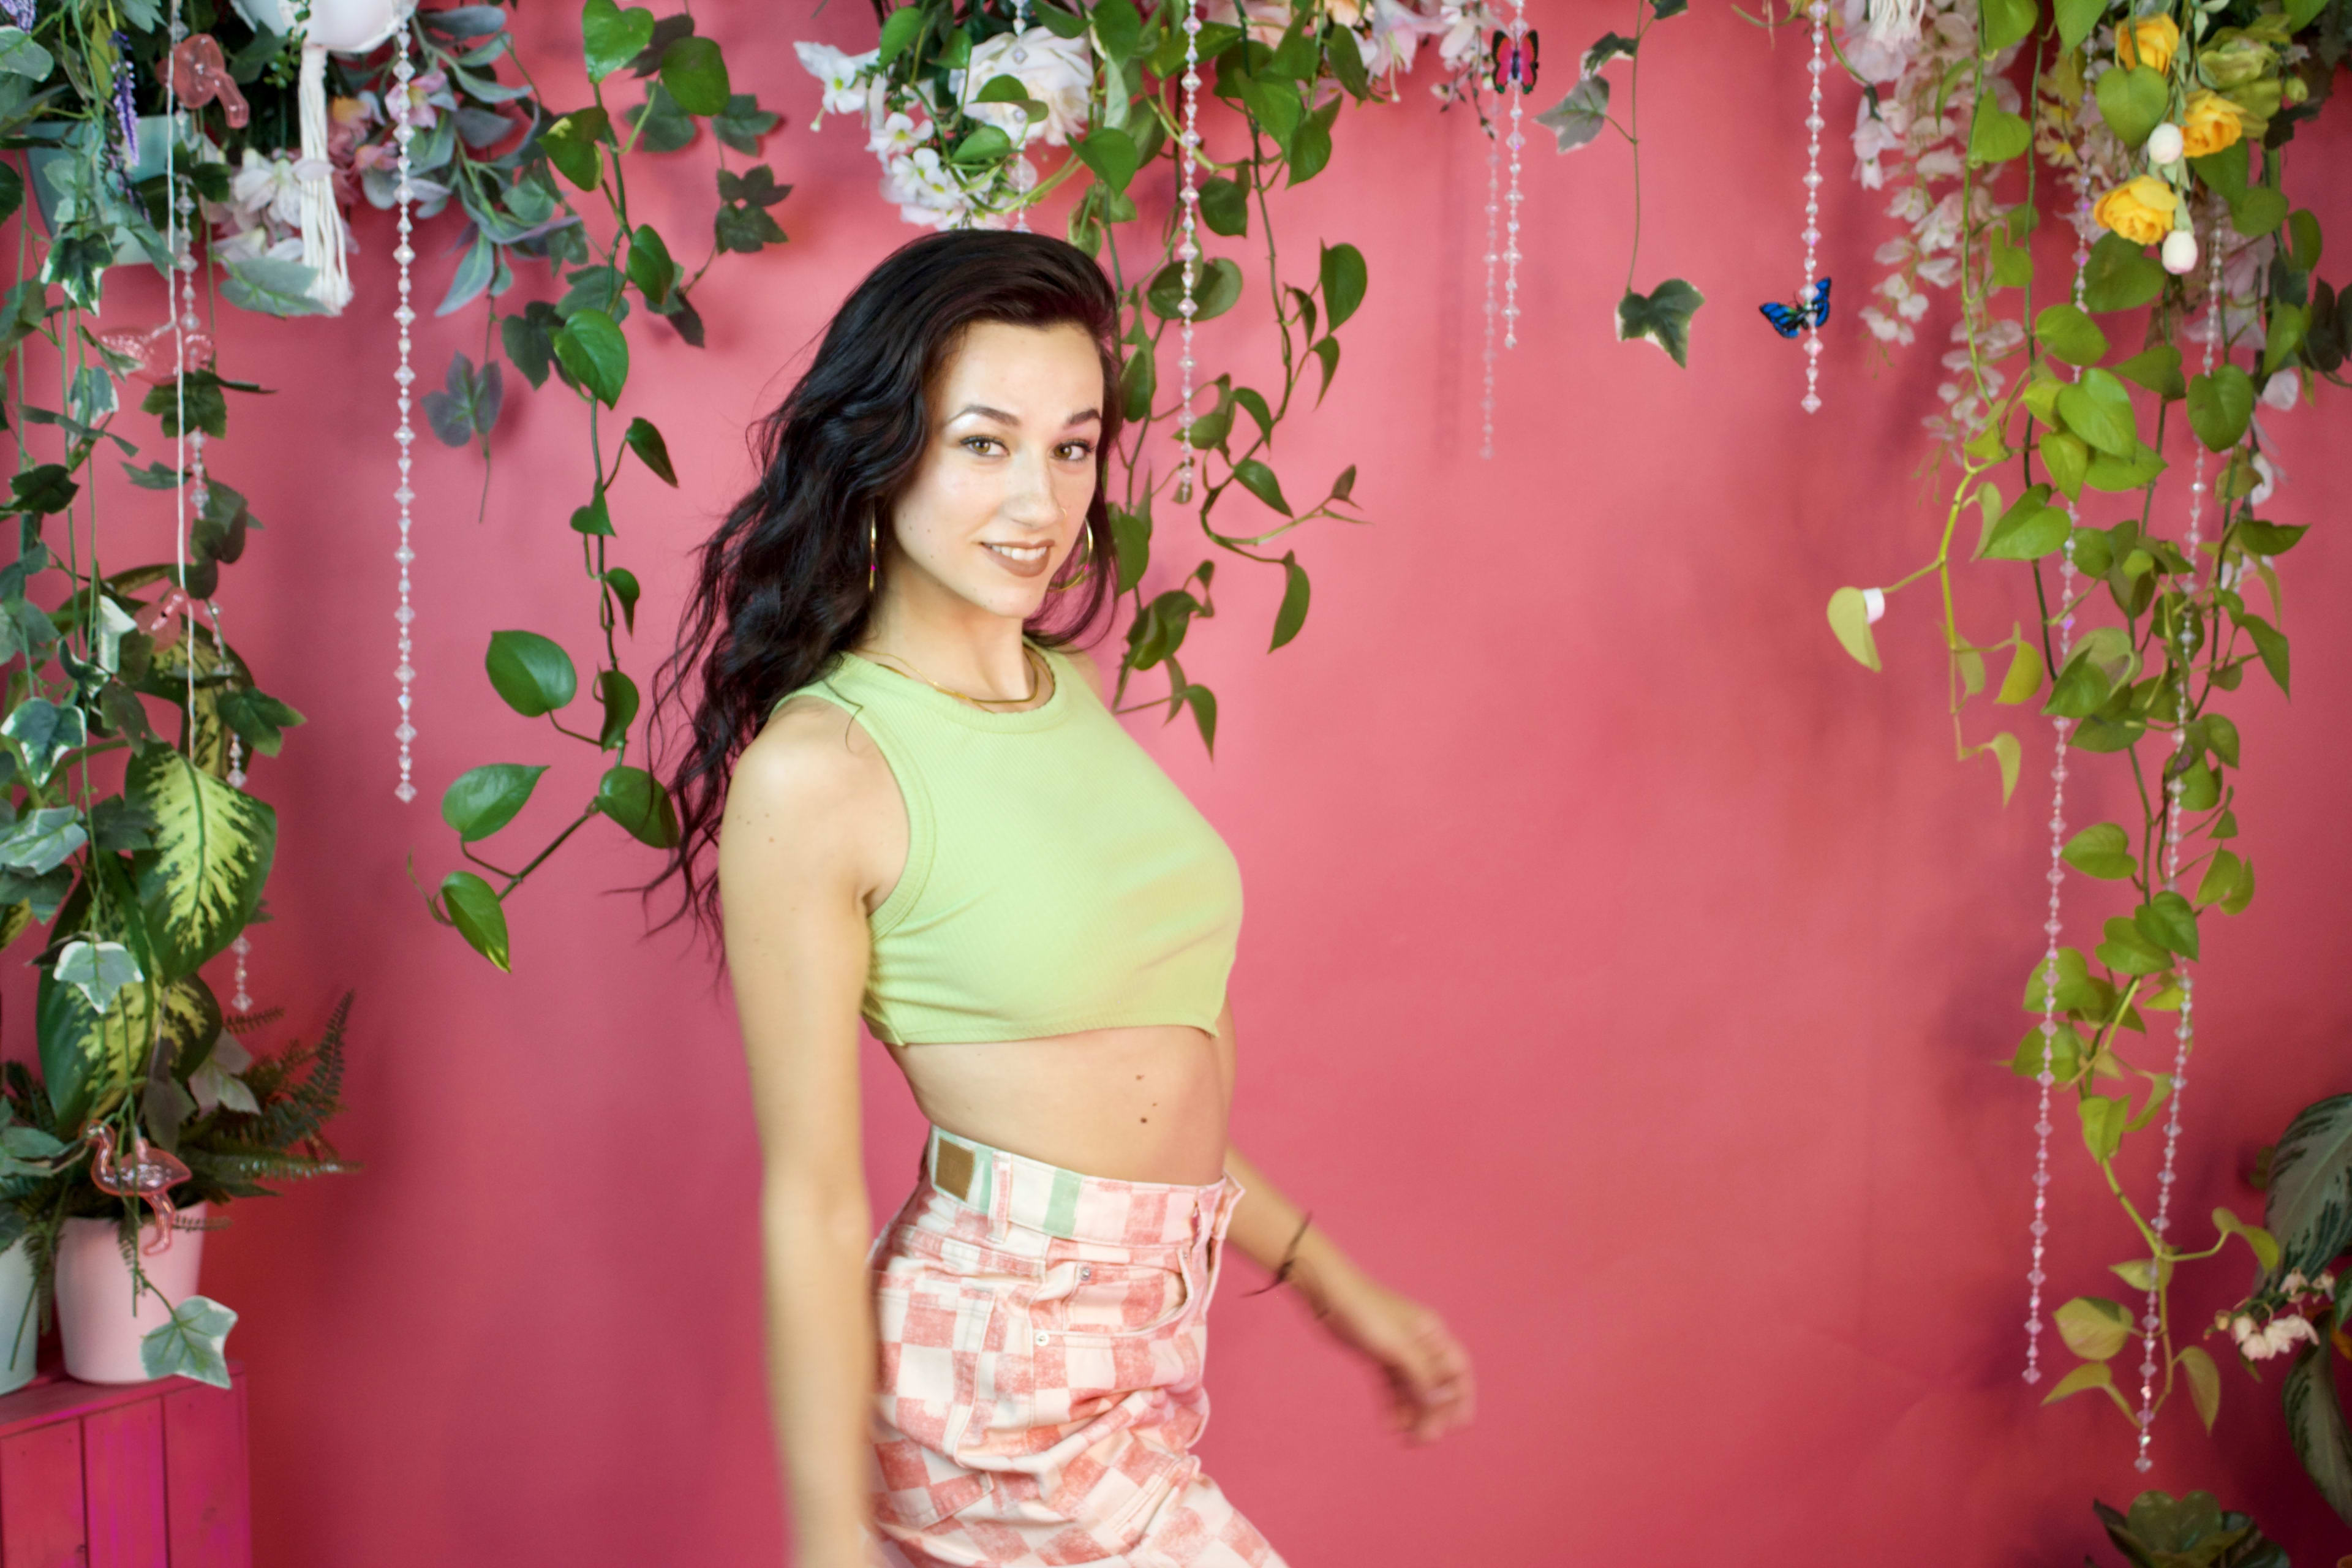 A woman posing in front of a pink wall for a fashion photoshoot.